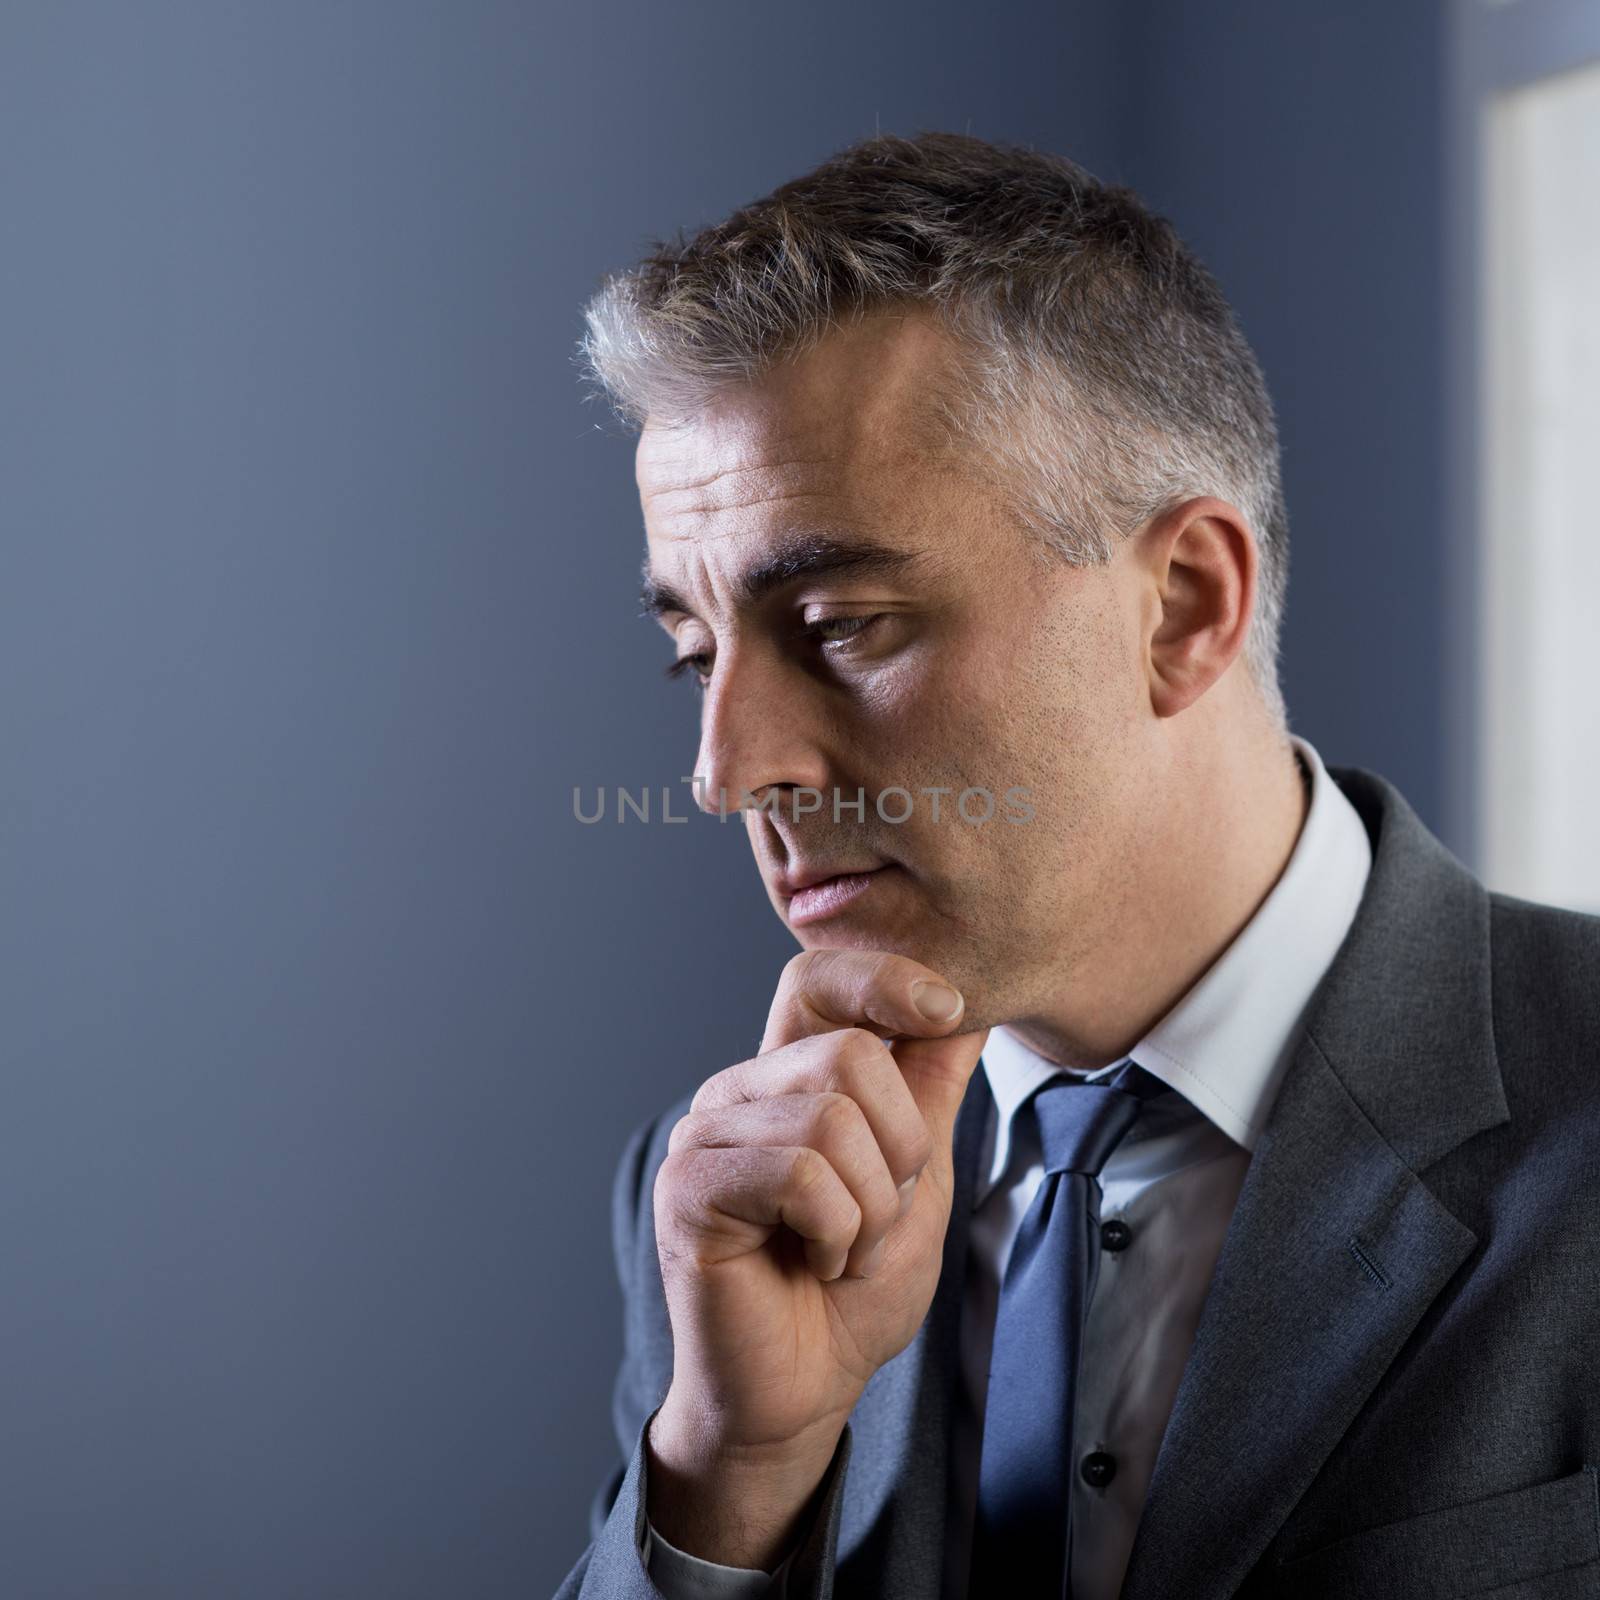 Pensive businessman with hand on chin at office.